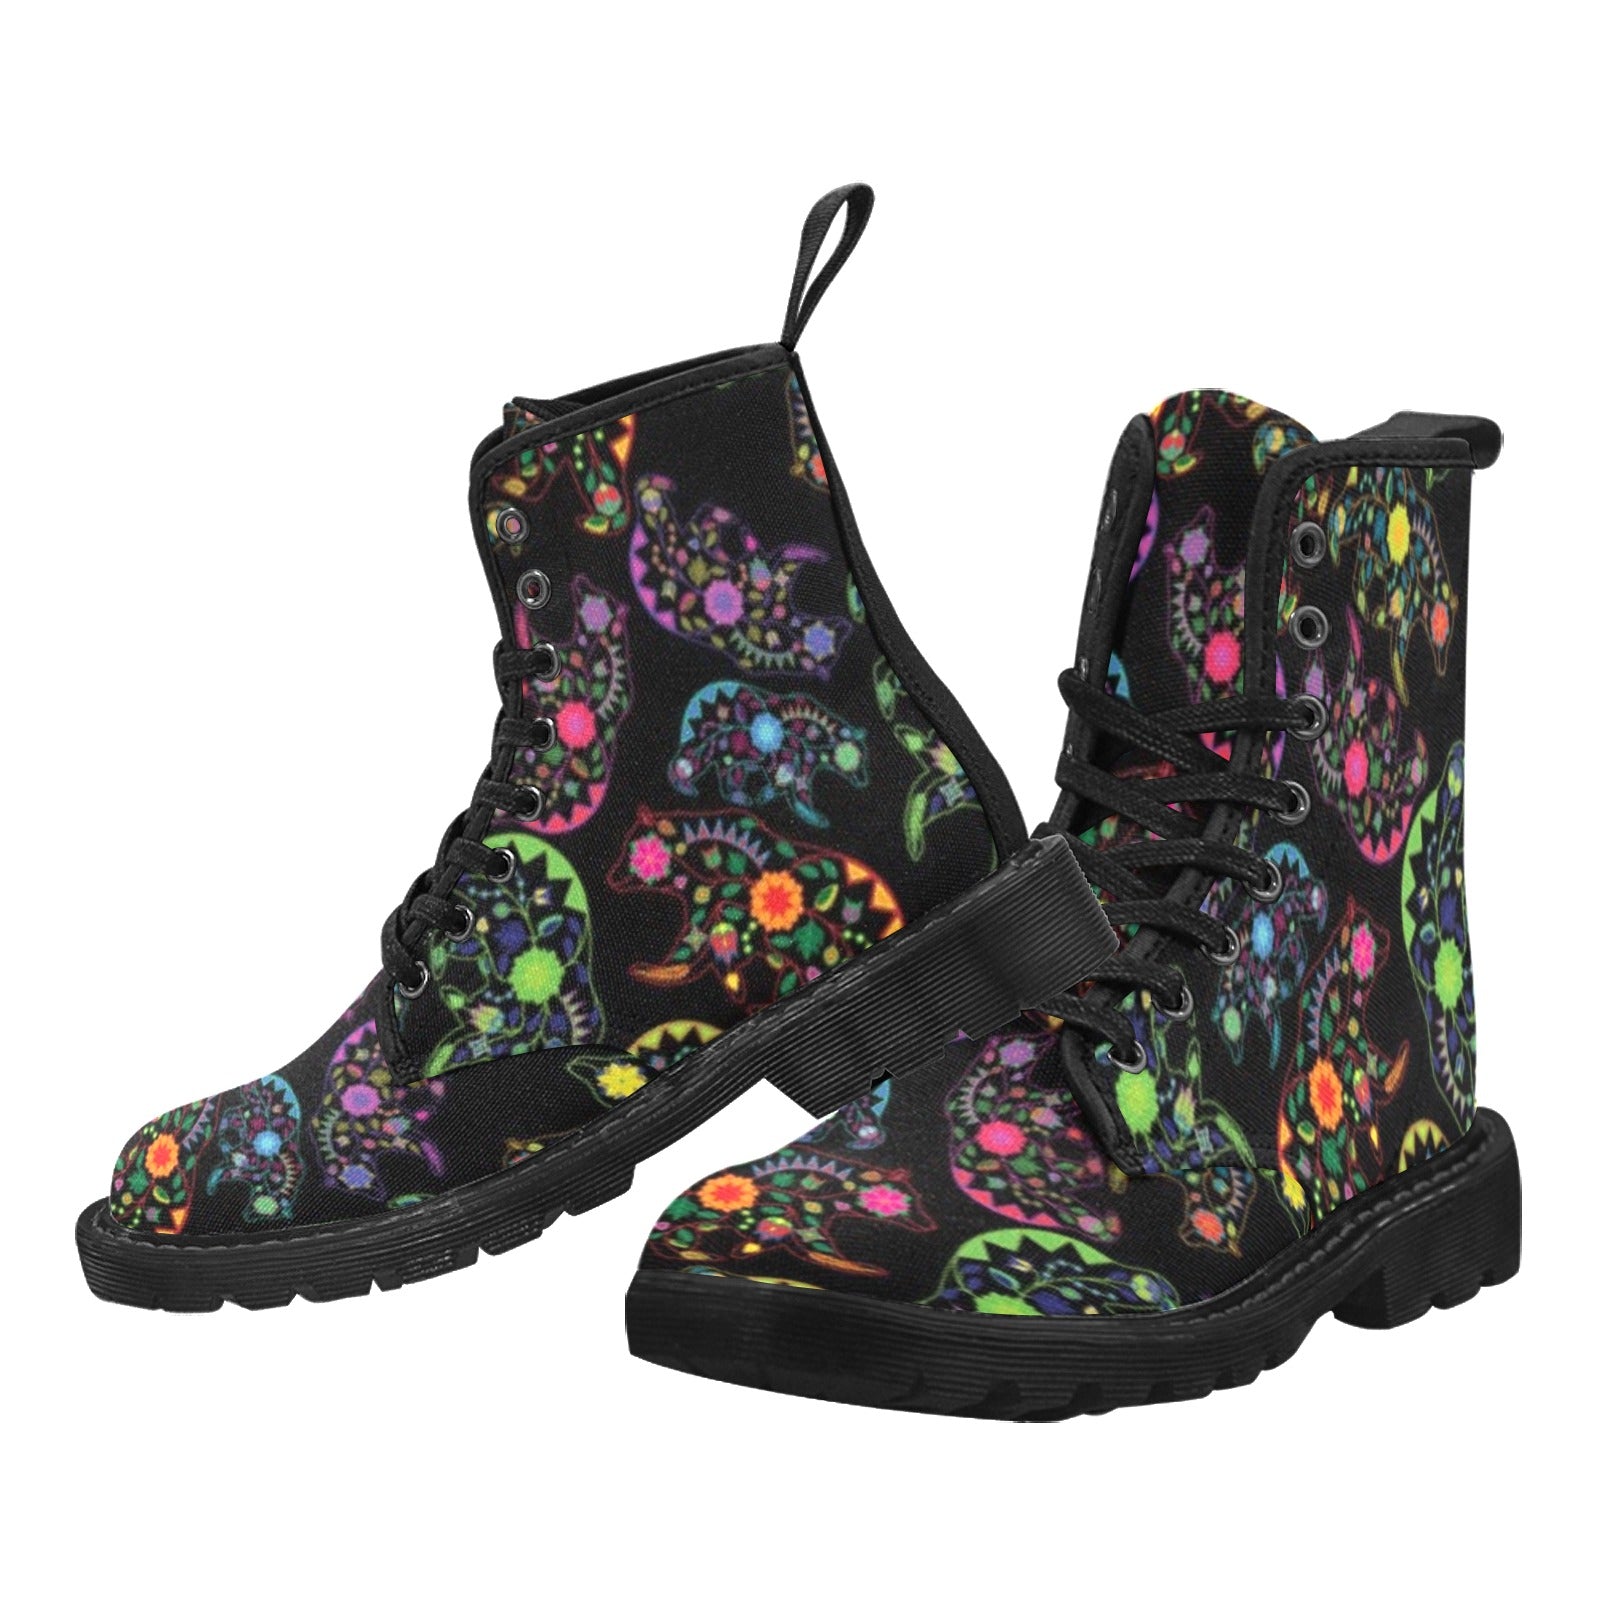 Neon Floral Bears Boots for Men (Black)